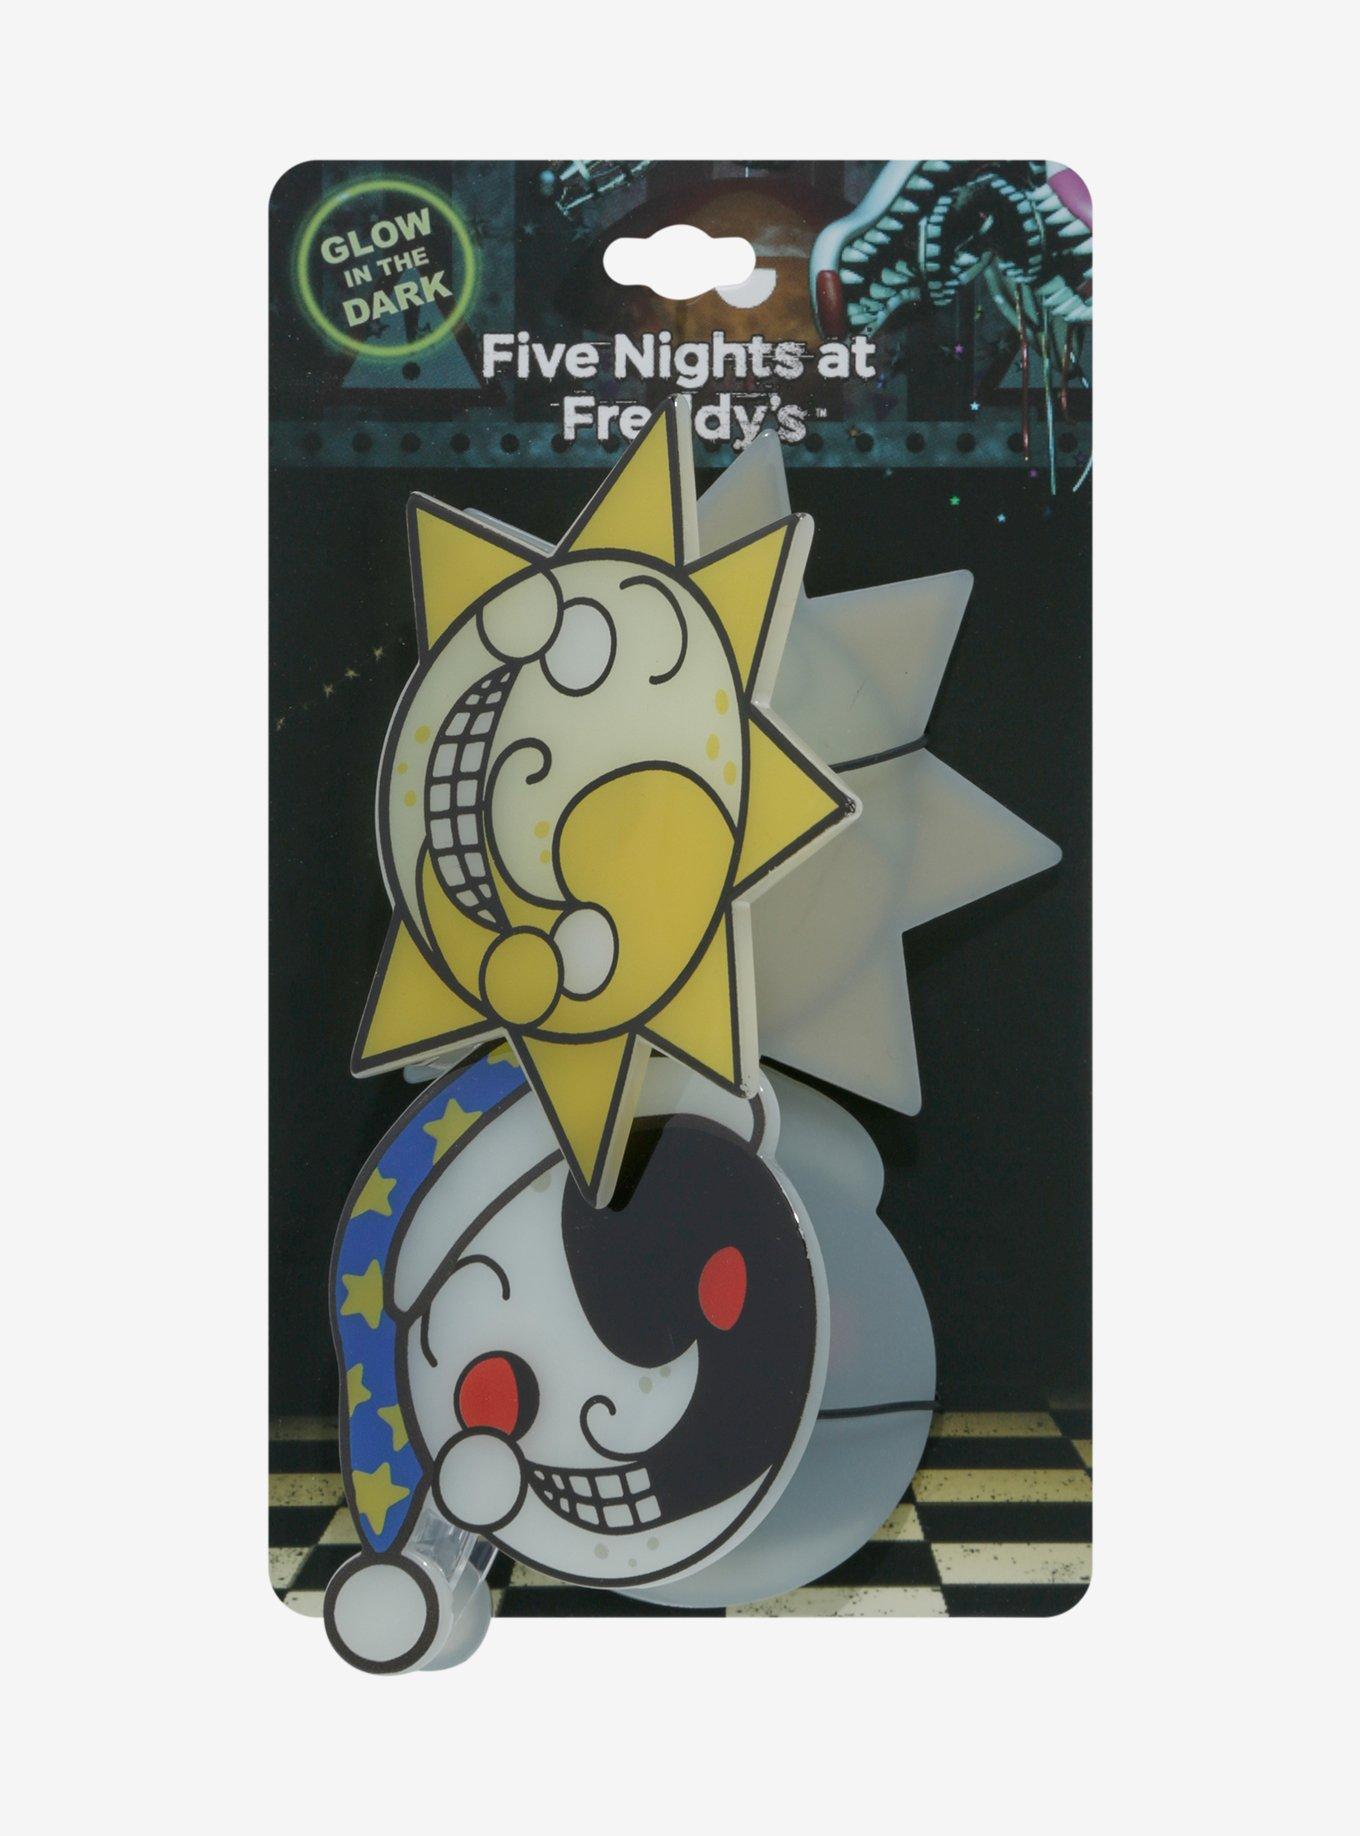 Five Nights At Freddy's: Security Breach Sun & Moon Glow-In-The-Dark Claw Hair Clip Set